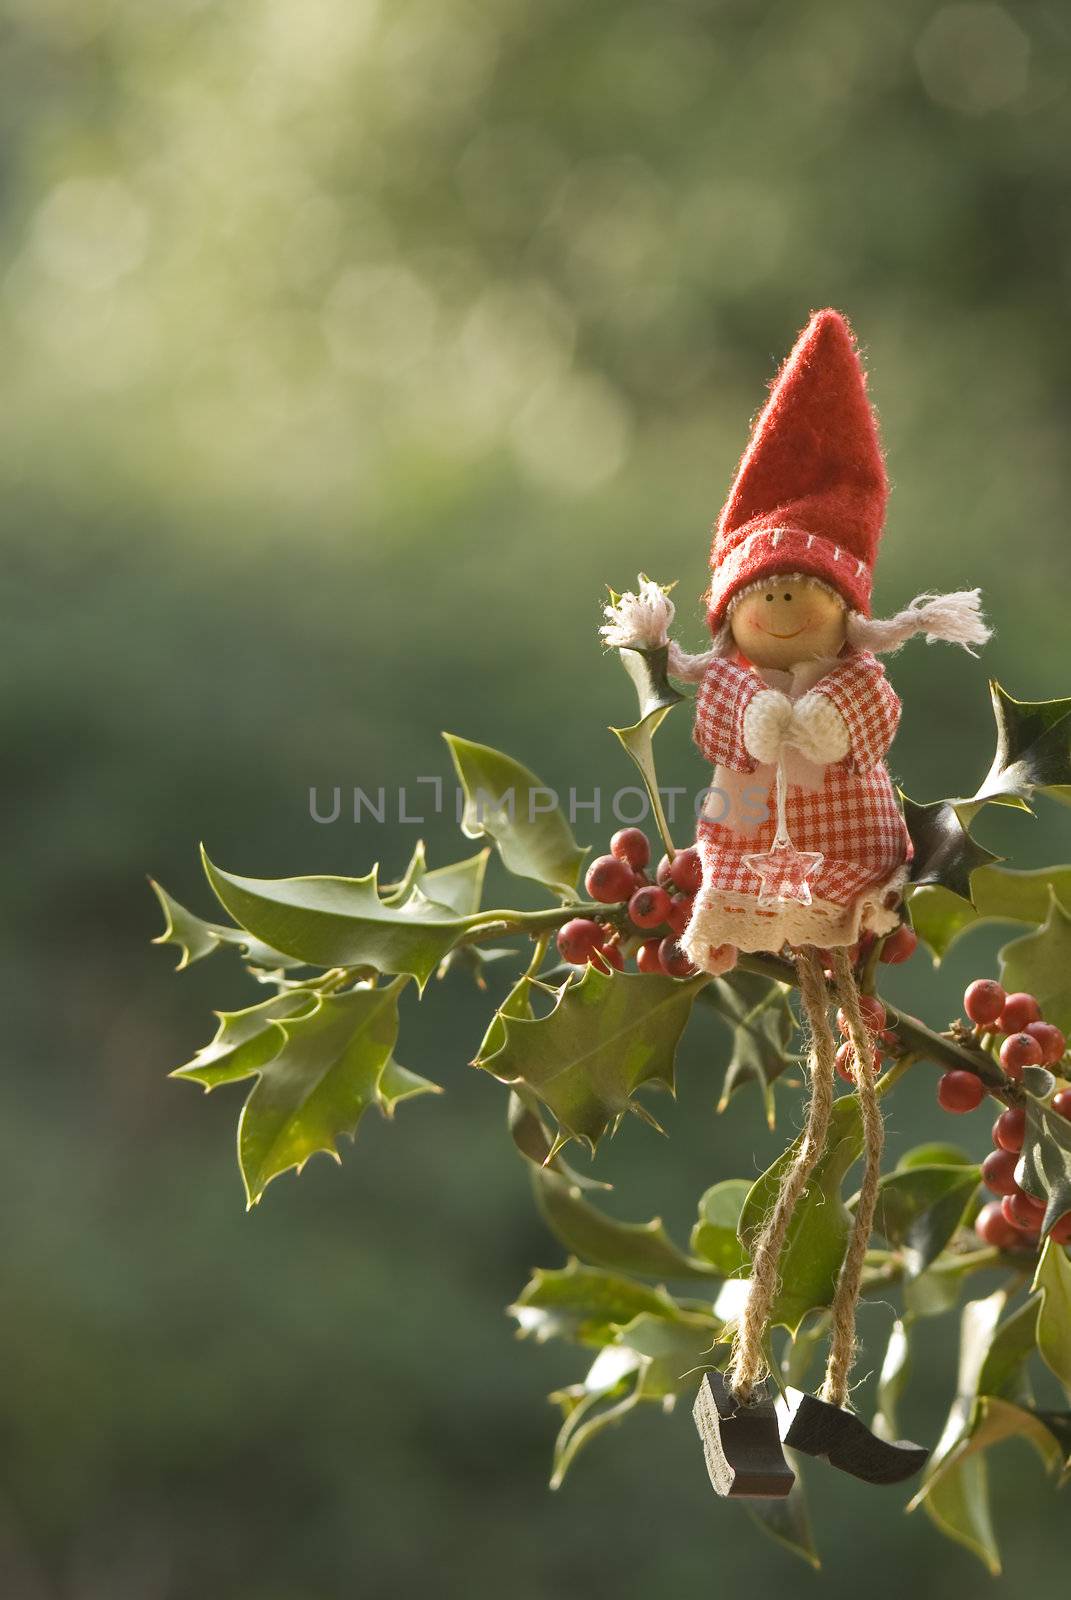 Christmas elf doll sitting on a branch of holly